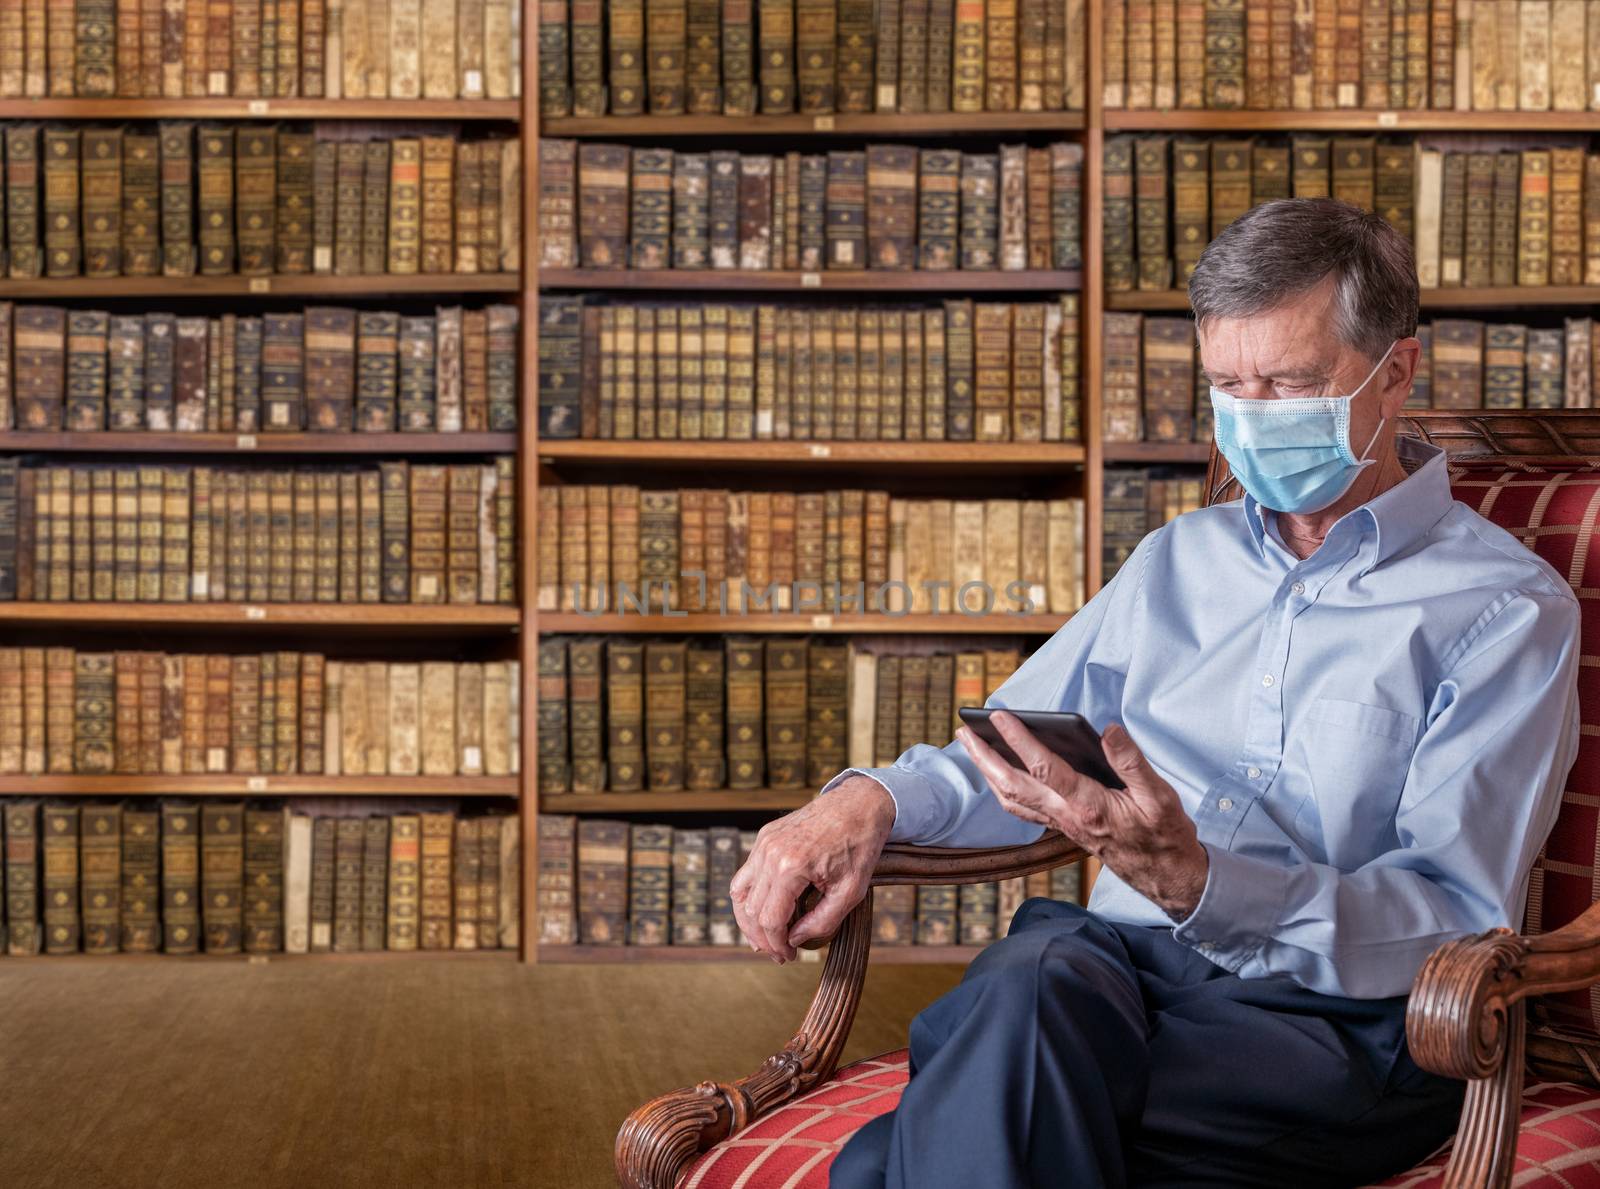 Senior caucasian man with a face mask against coronavirus reading an ebook tablet in old fashioned library of antique books